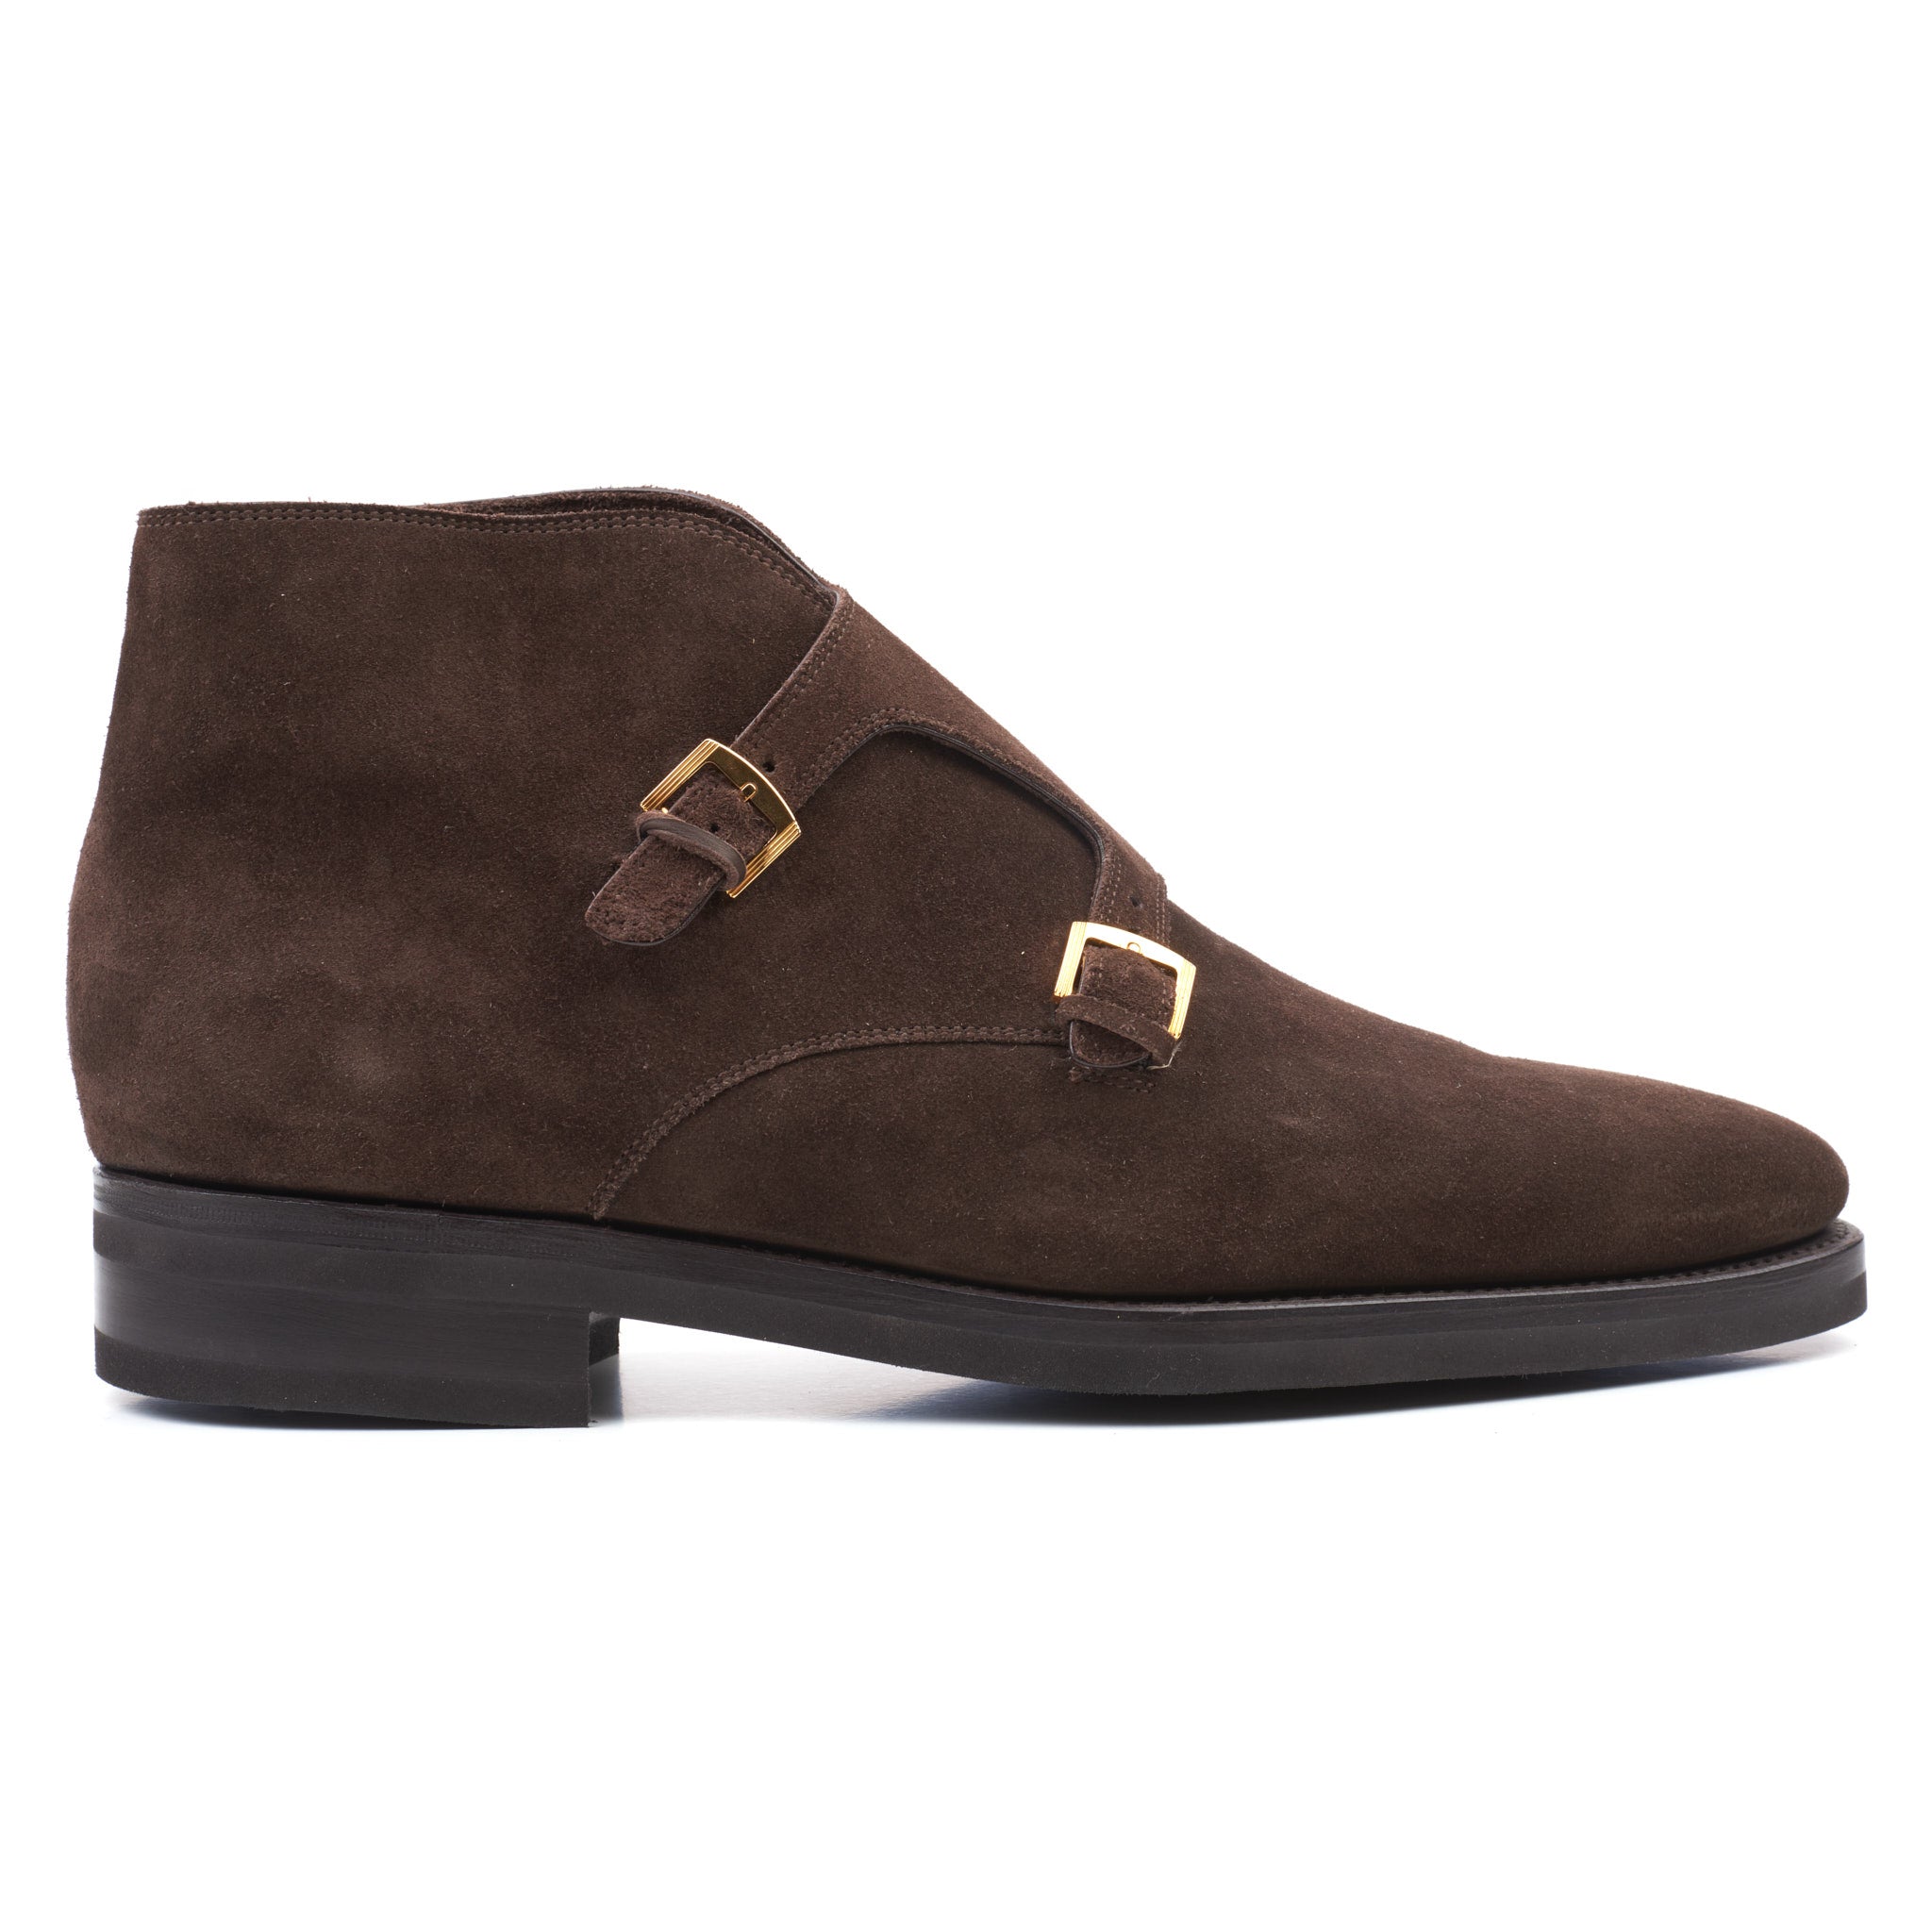 KITON Brown Calfskin Suede Leather Double Monk Ankle Chukka-Boots Shoe